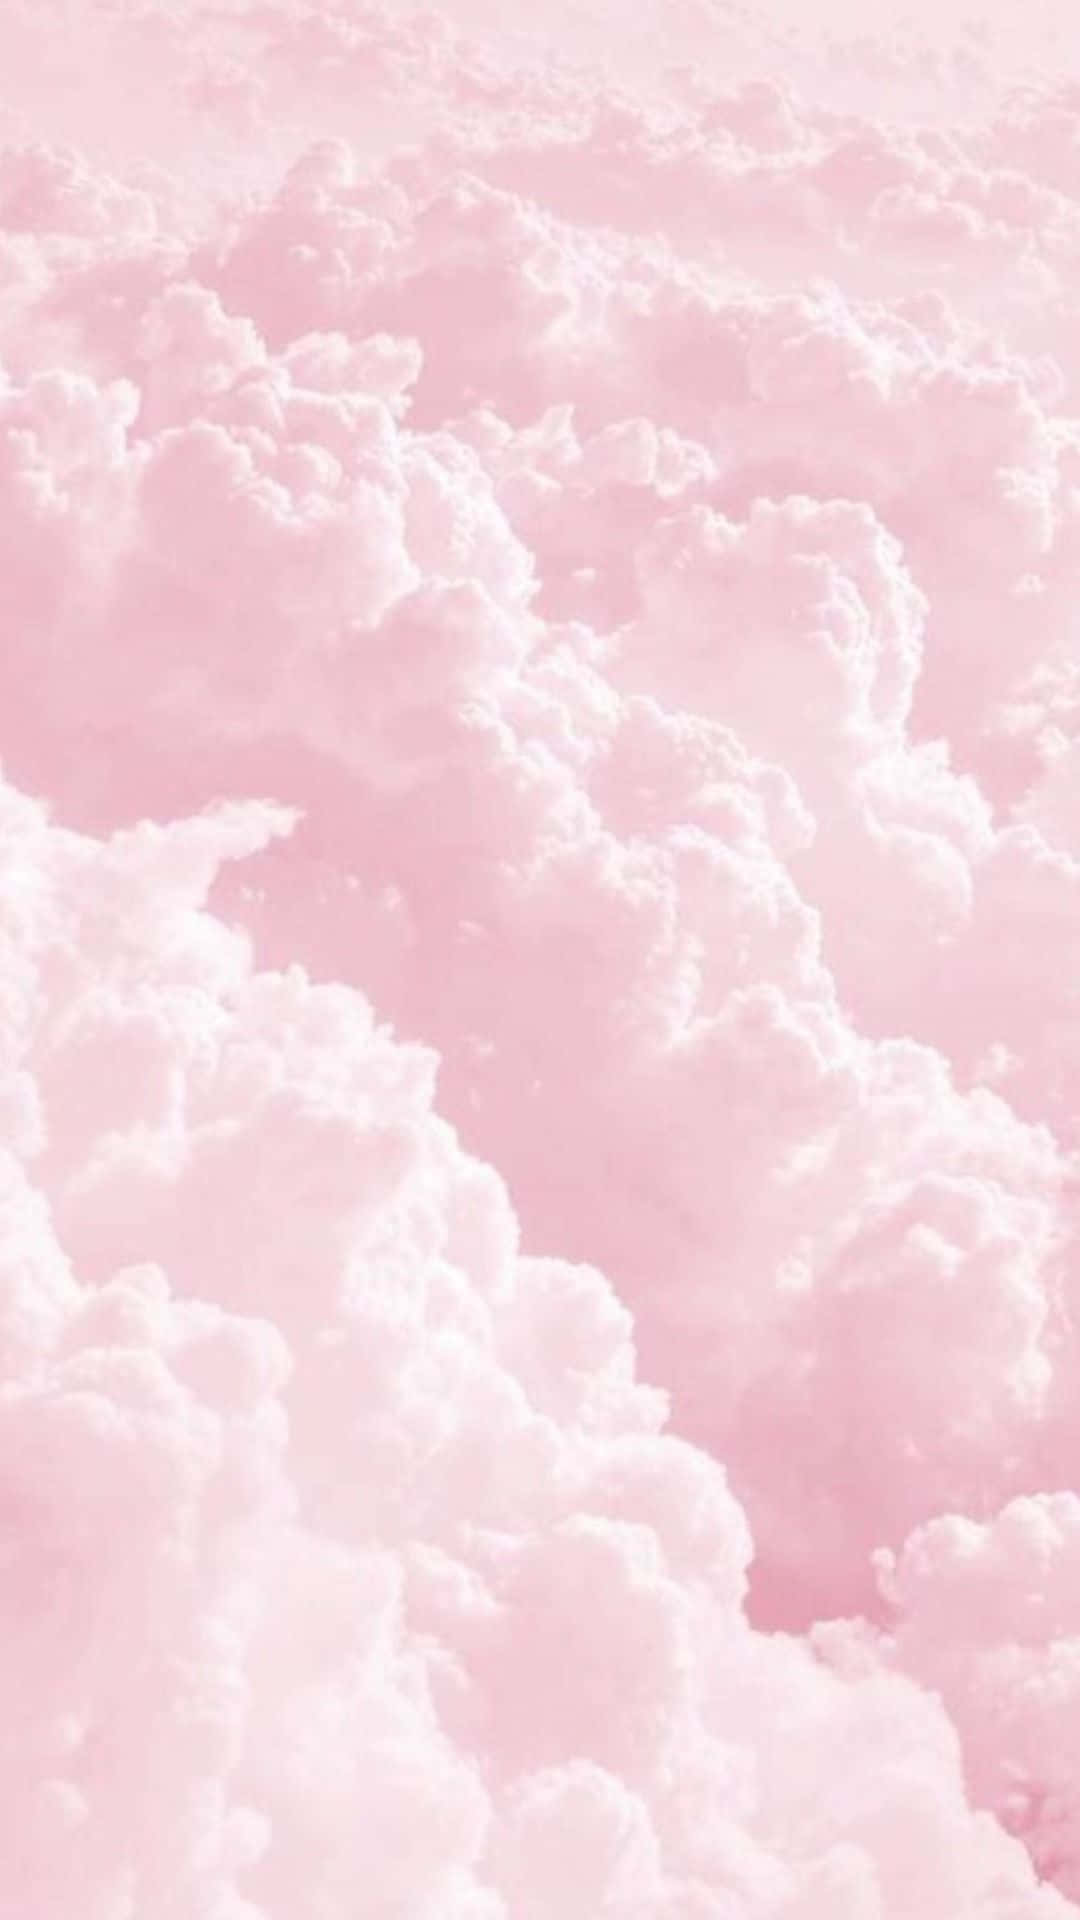 Let this pink and white aesthetic take you to a dream-like place Wallpaper